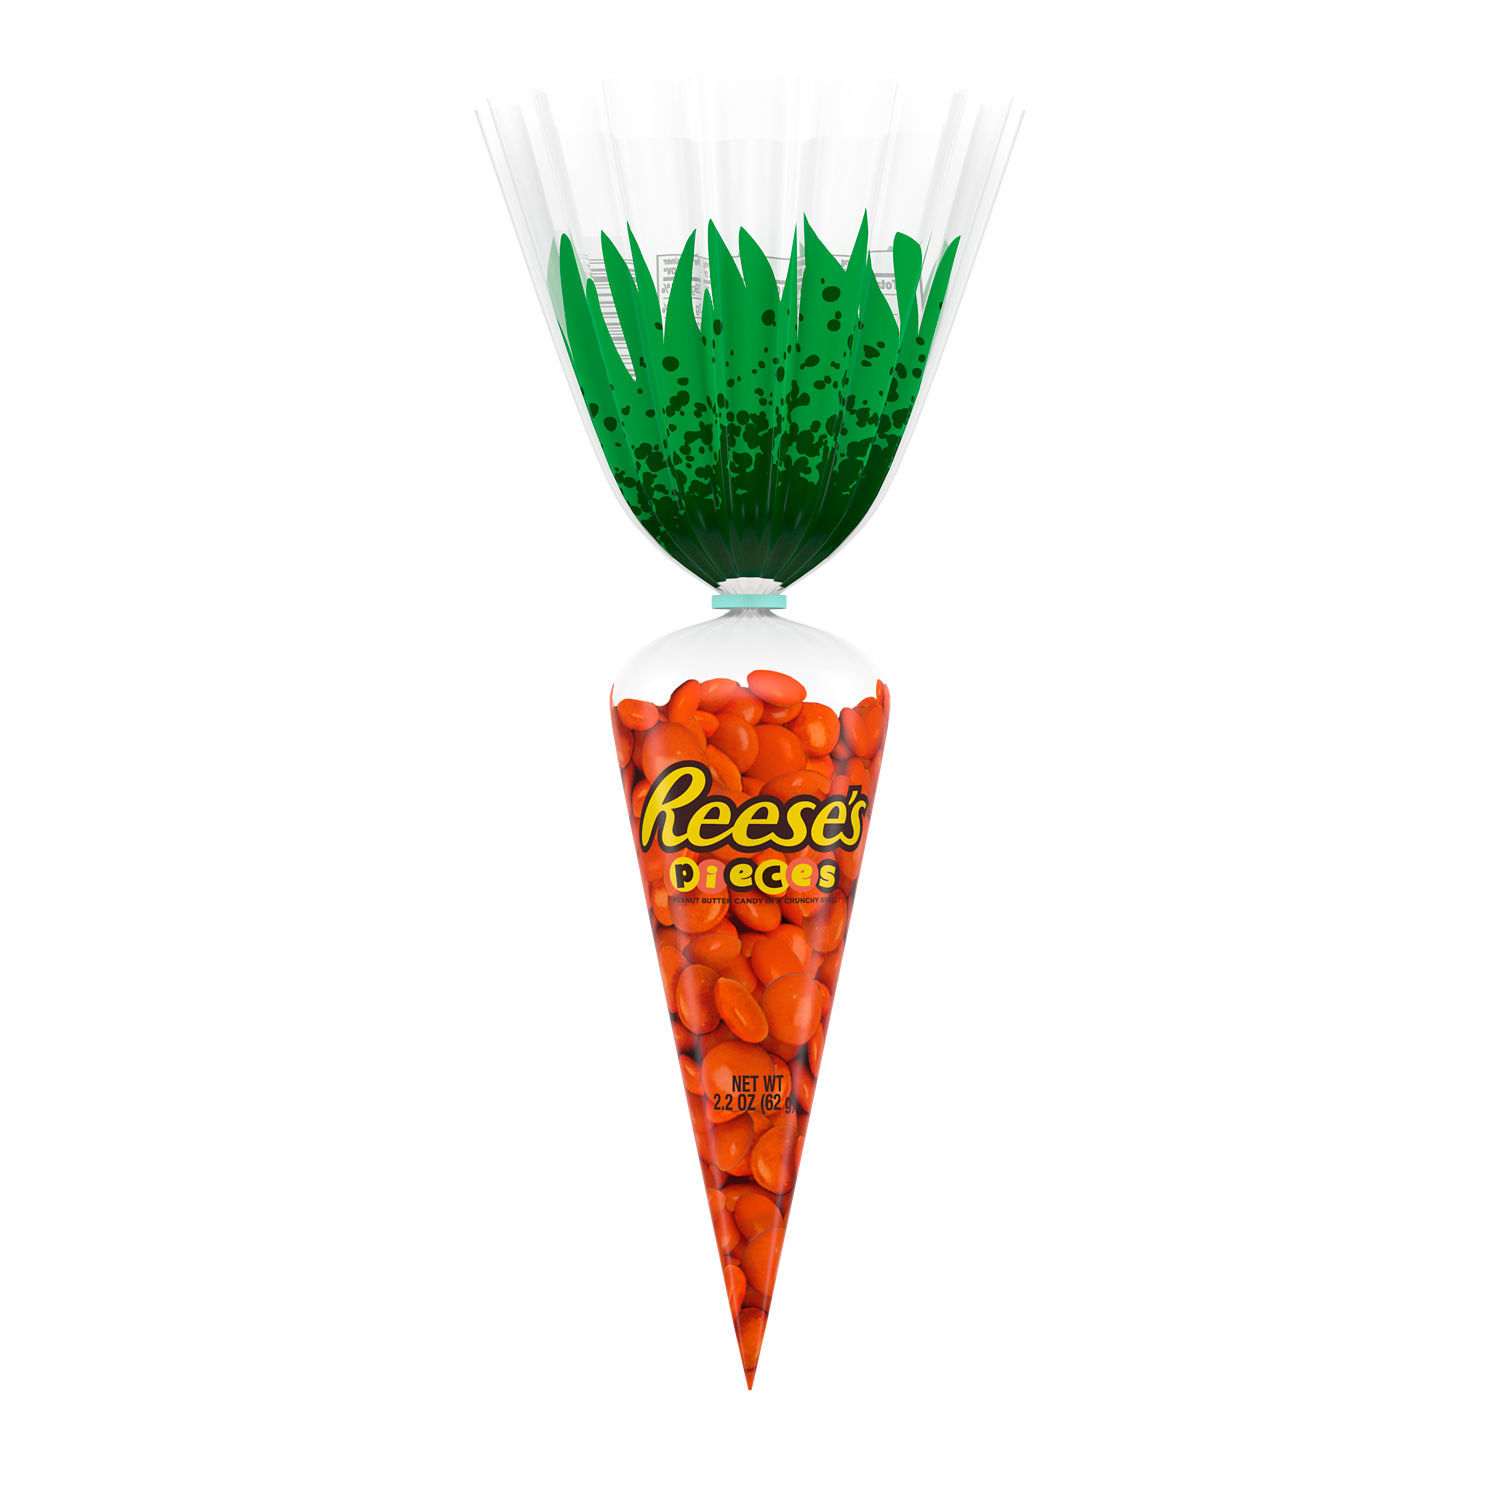 REESE'S, PIECES Peanut Butter in a Crunchy Shell Treats, Easter Candy, 2.2 oz, Carrot Bag - image 1 of 6